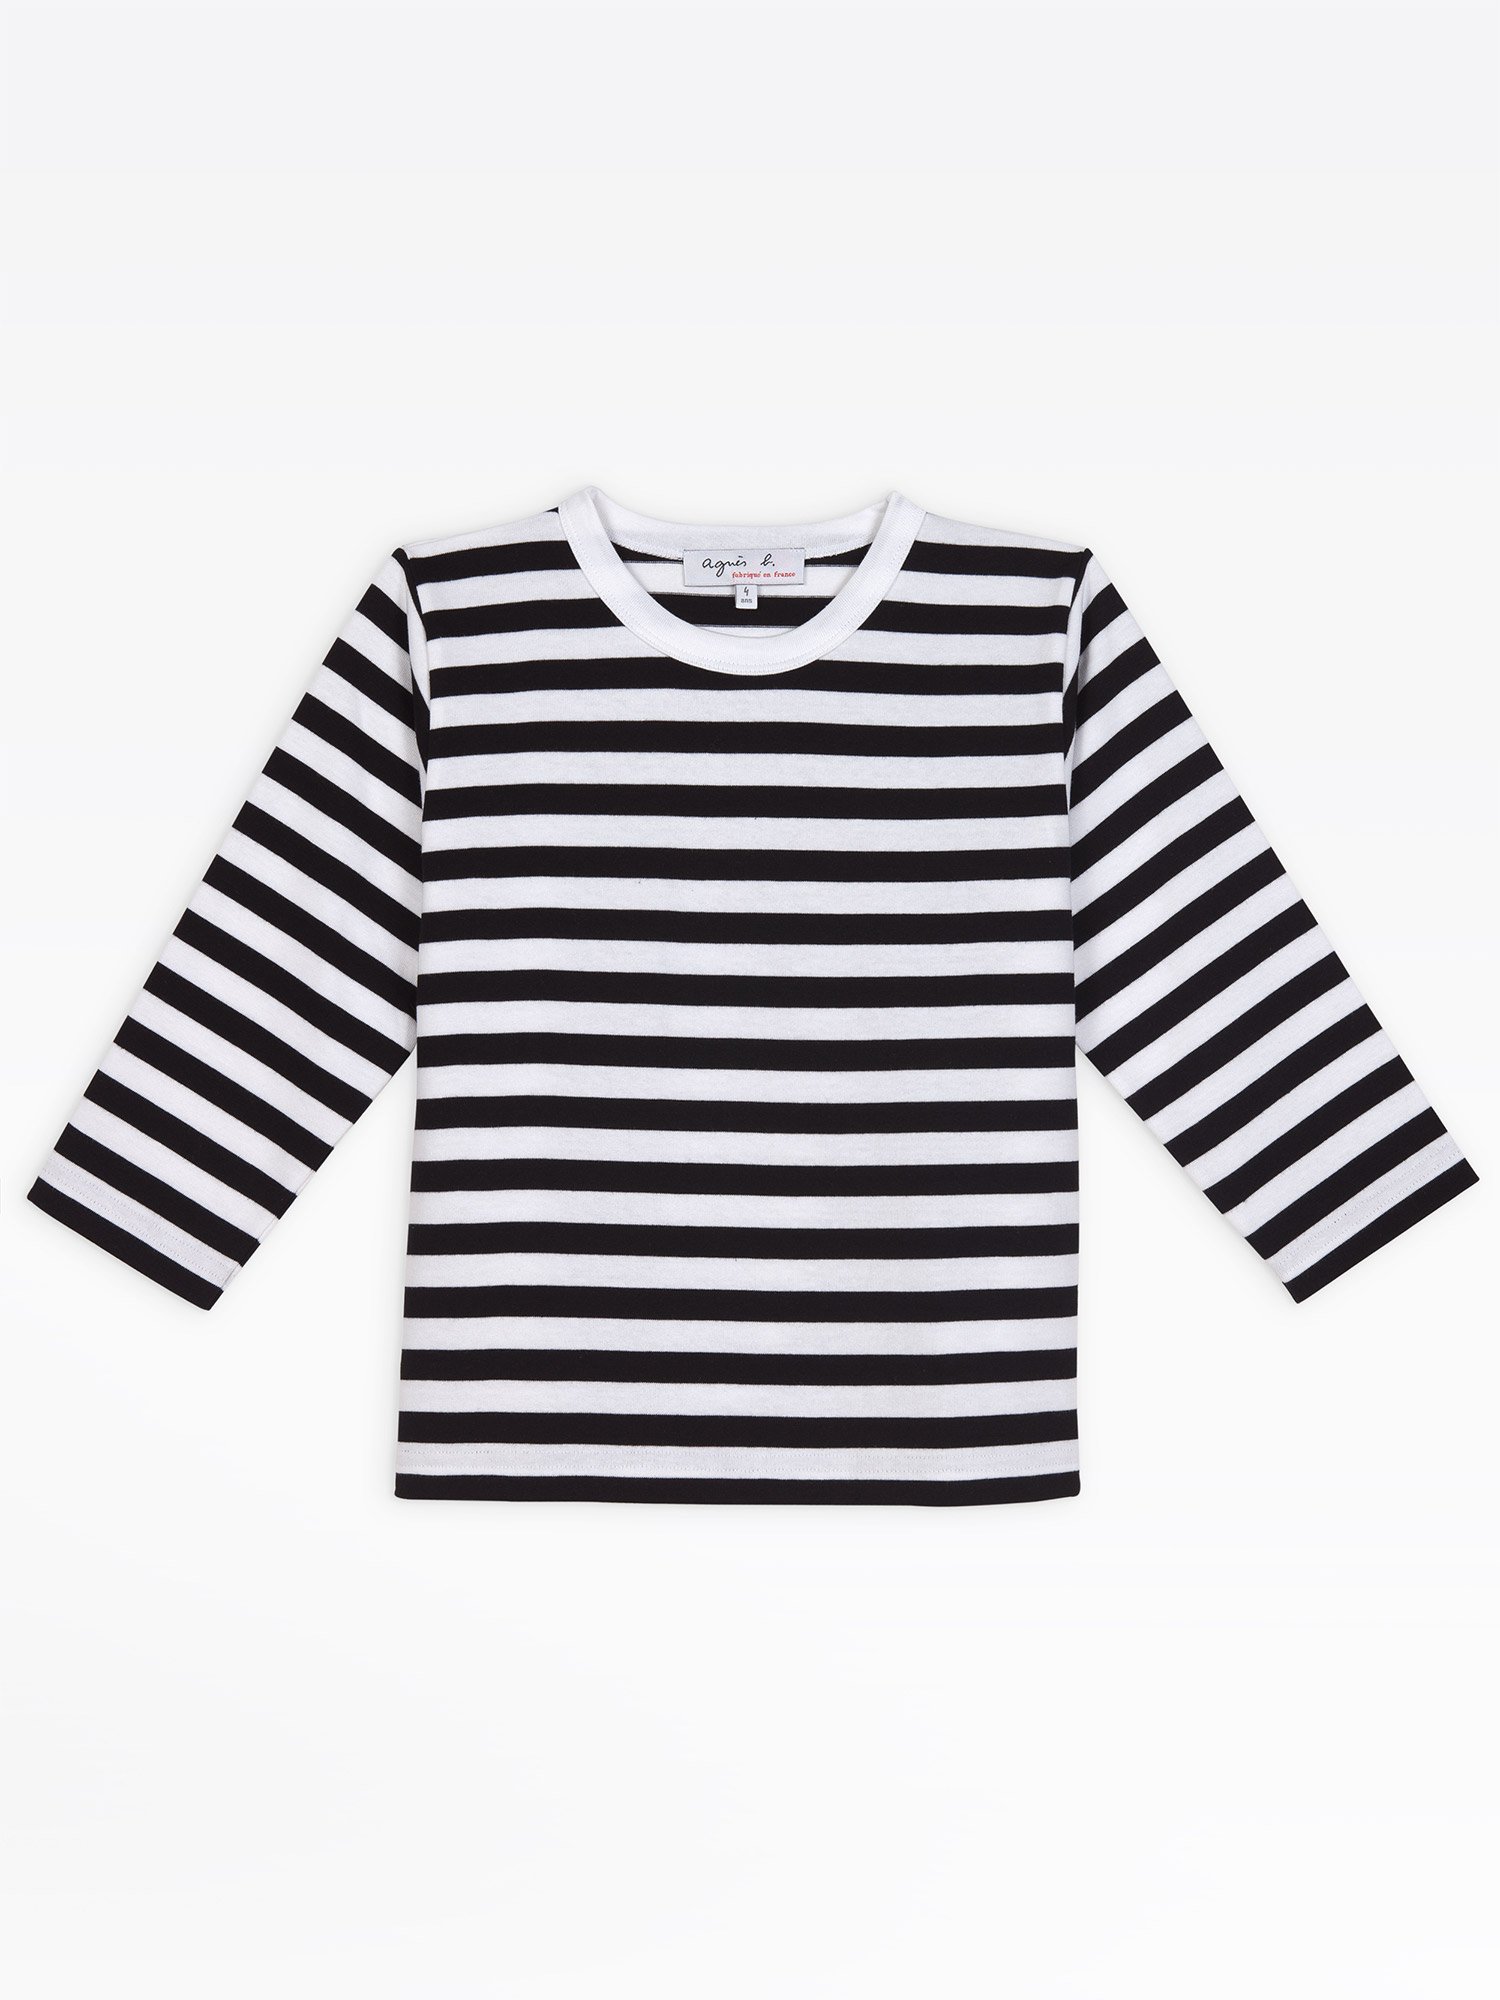 Black And White Striped T Shirt